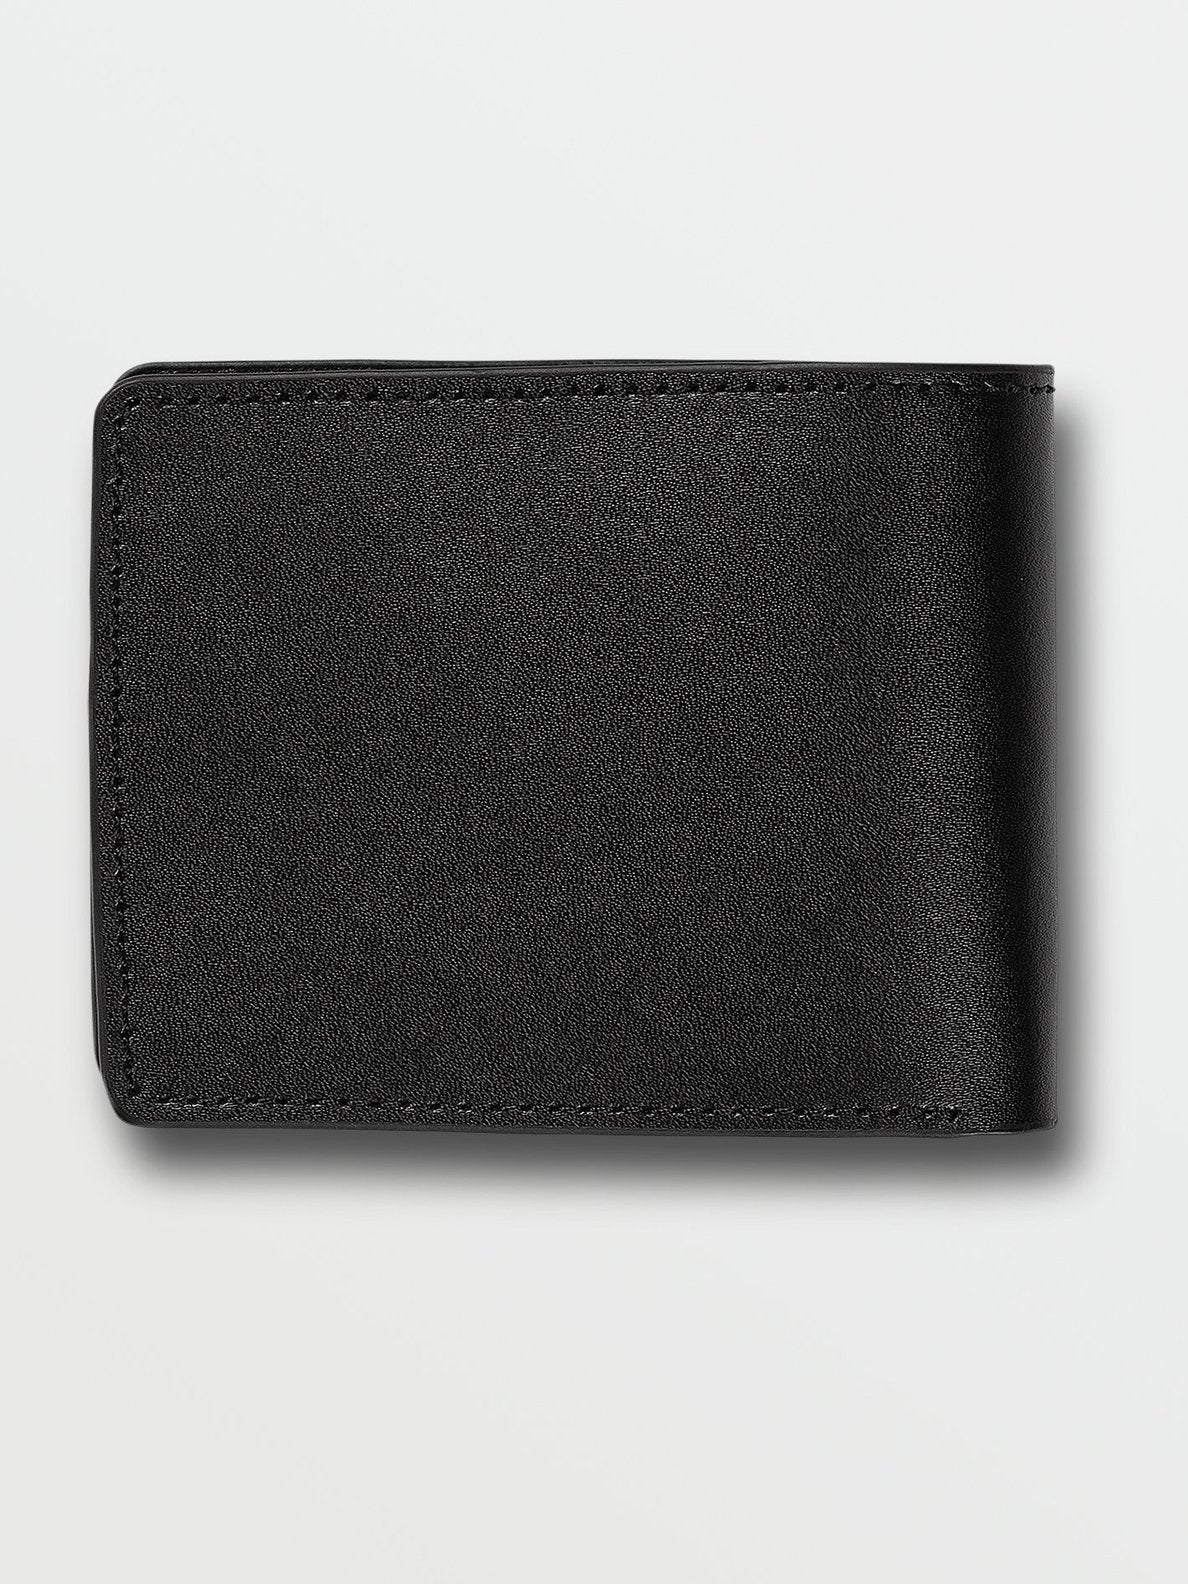 VOLCOM EVERS WALLET - BLACK freeshipping - FREESTYLE LLORET